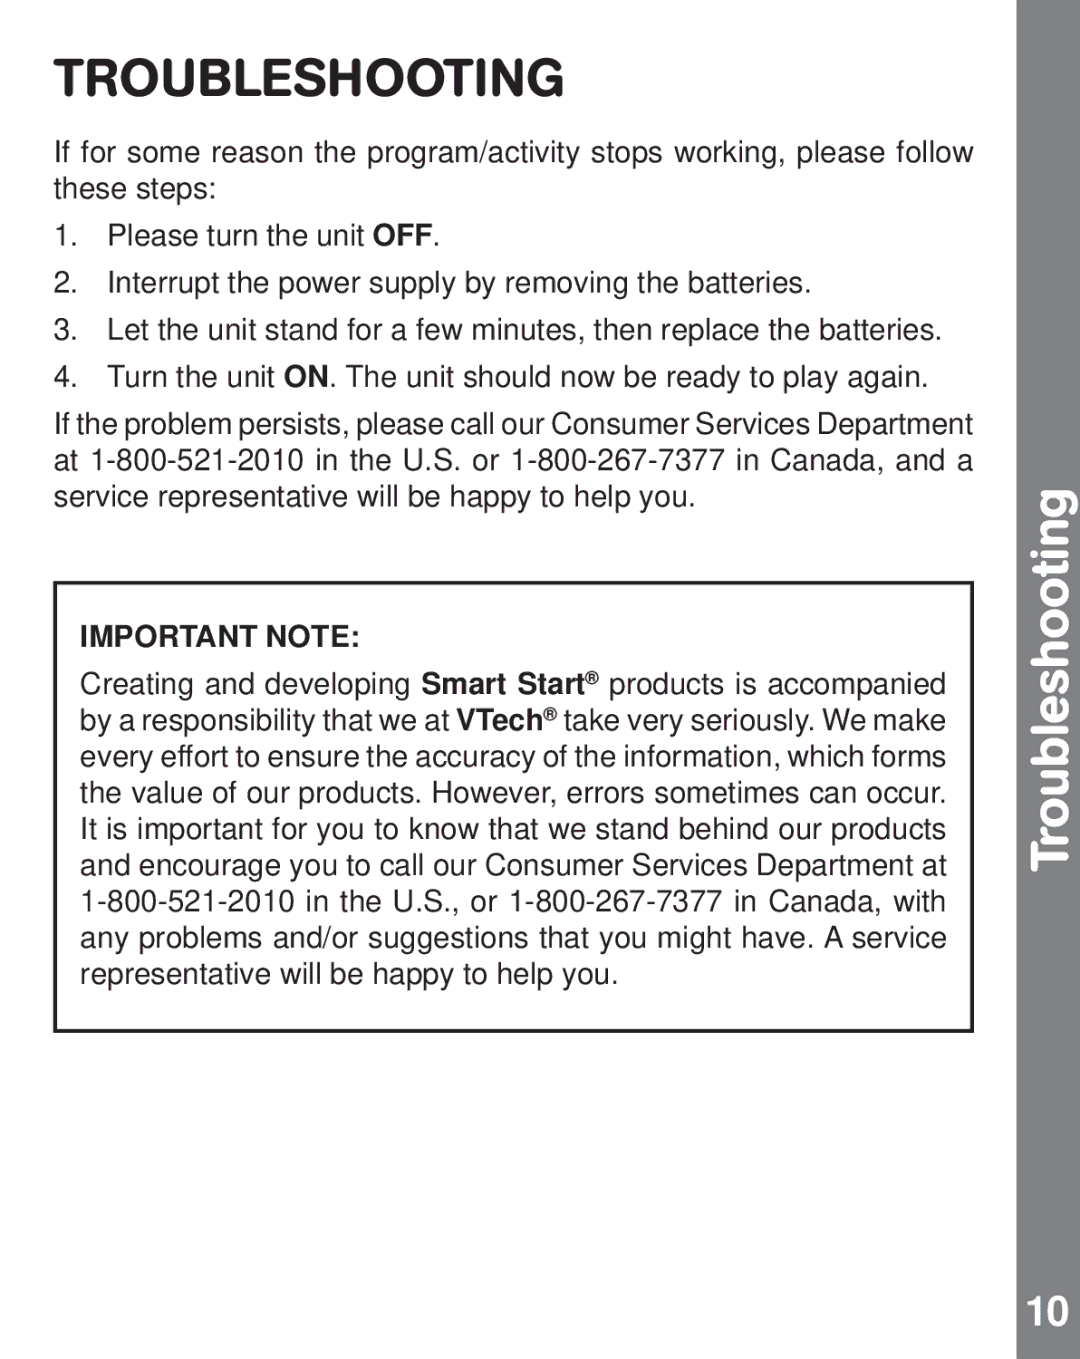 VTech sit-to-stand user manual Troubleshooting, Important Note 